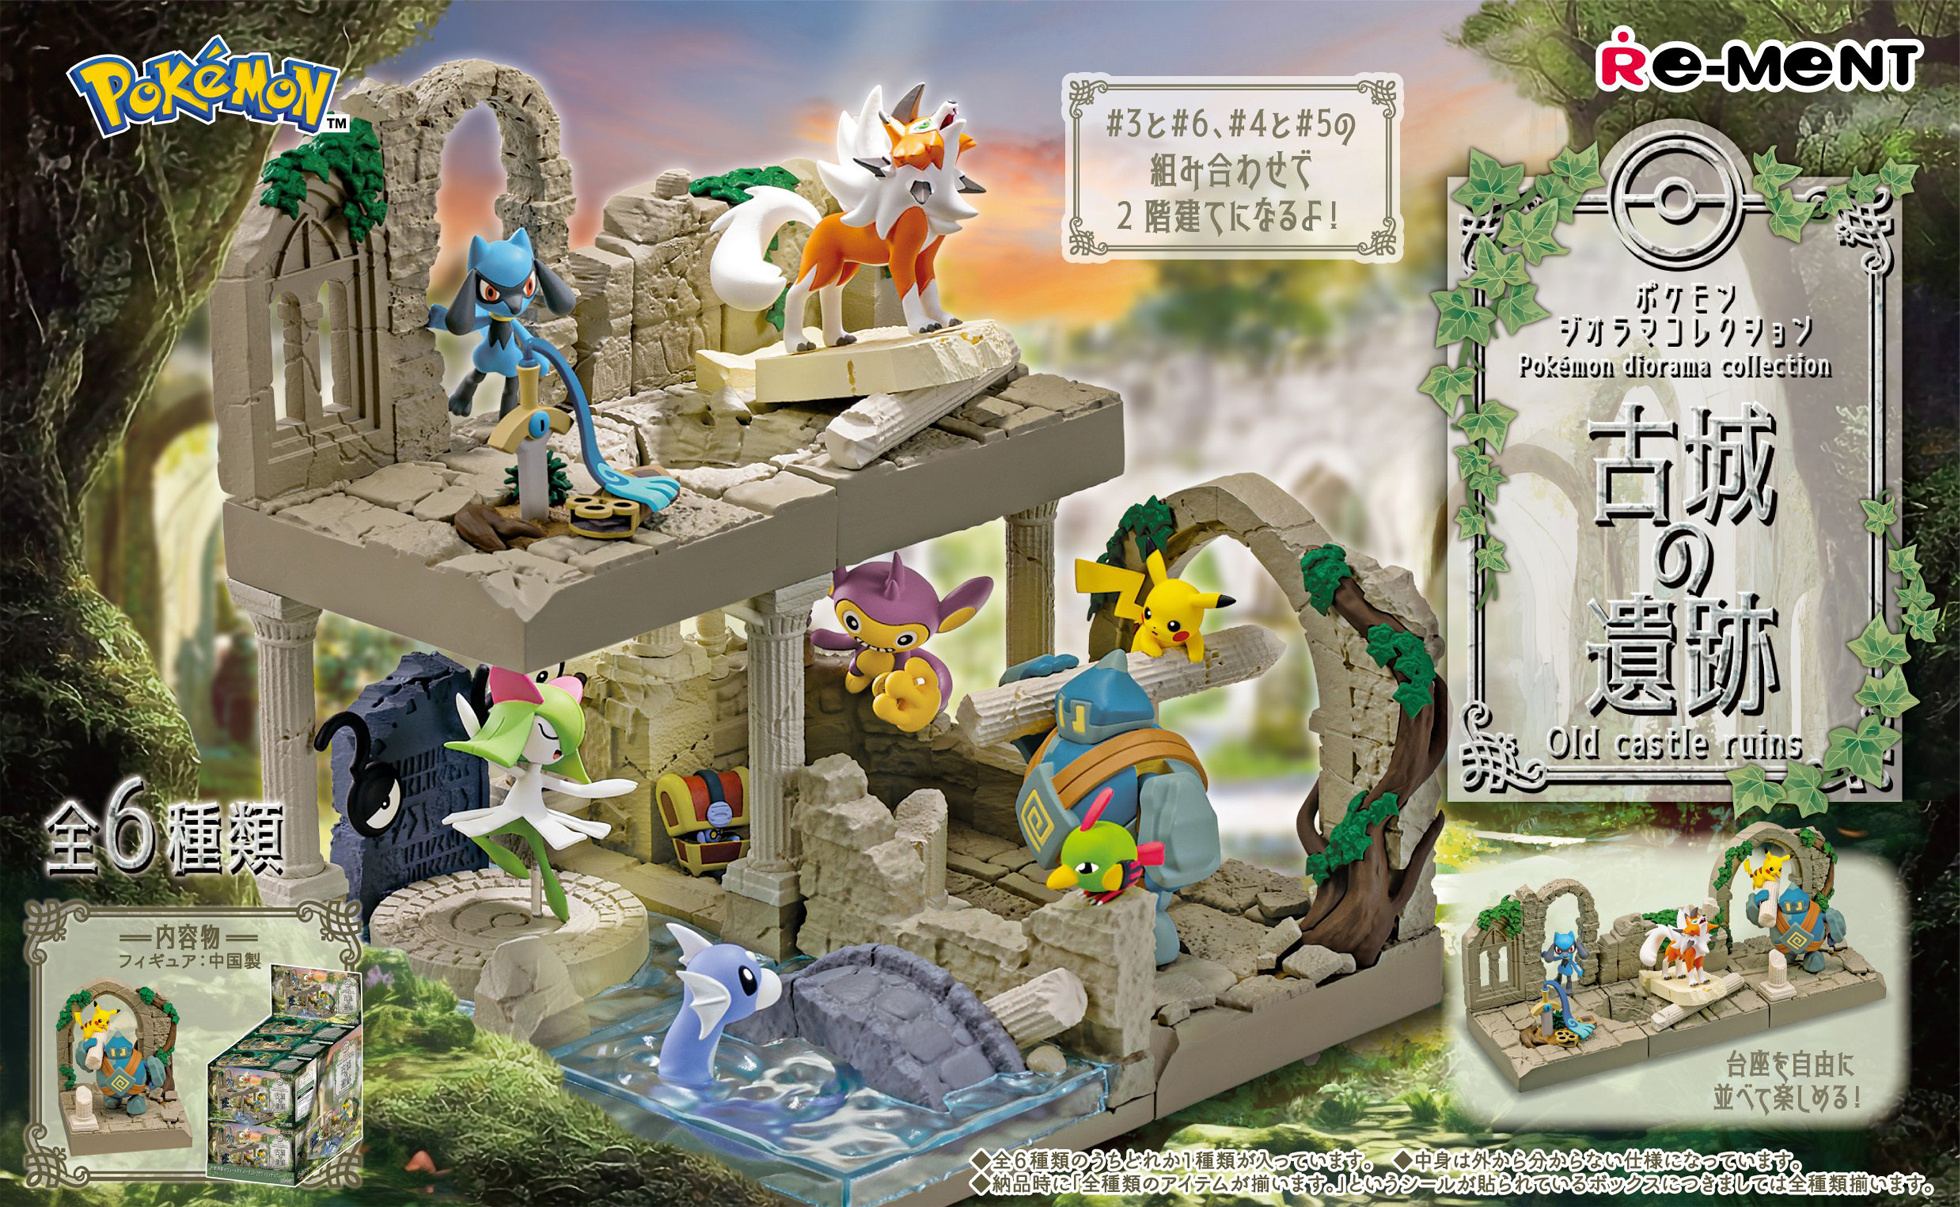 Pokemon Diorama Collection Old Castle Ruins (Set of 6 Pieces) Re-ment